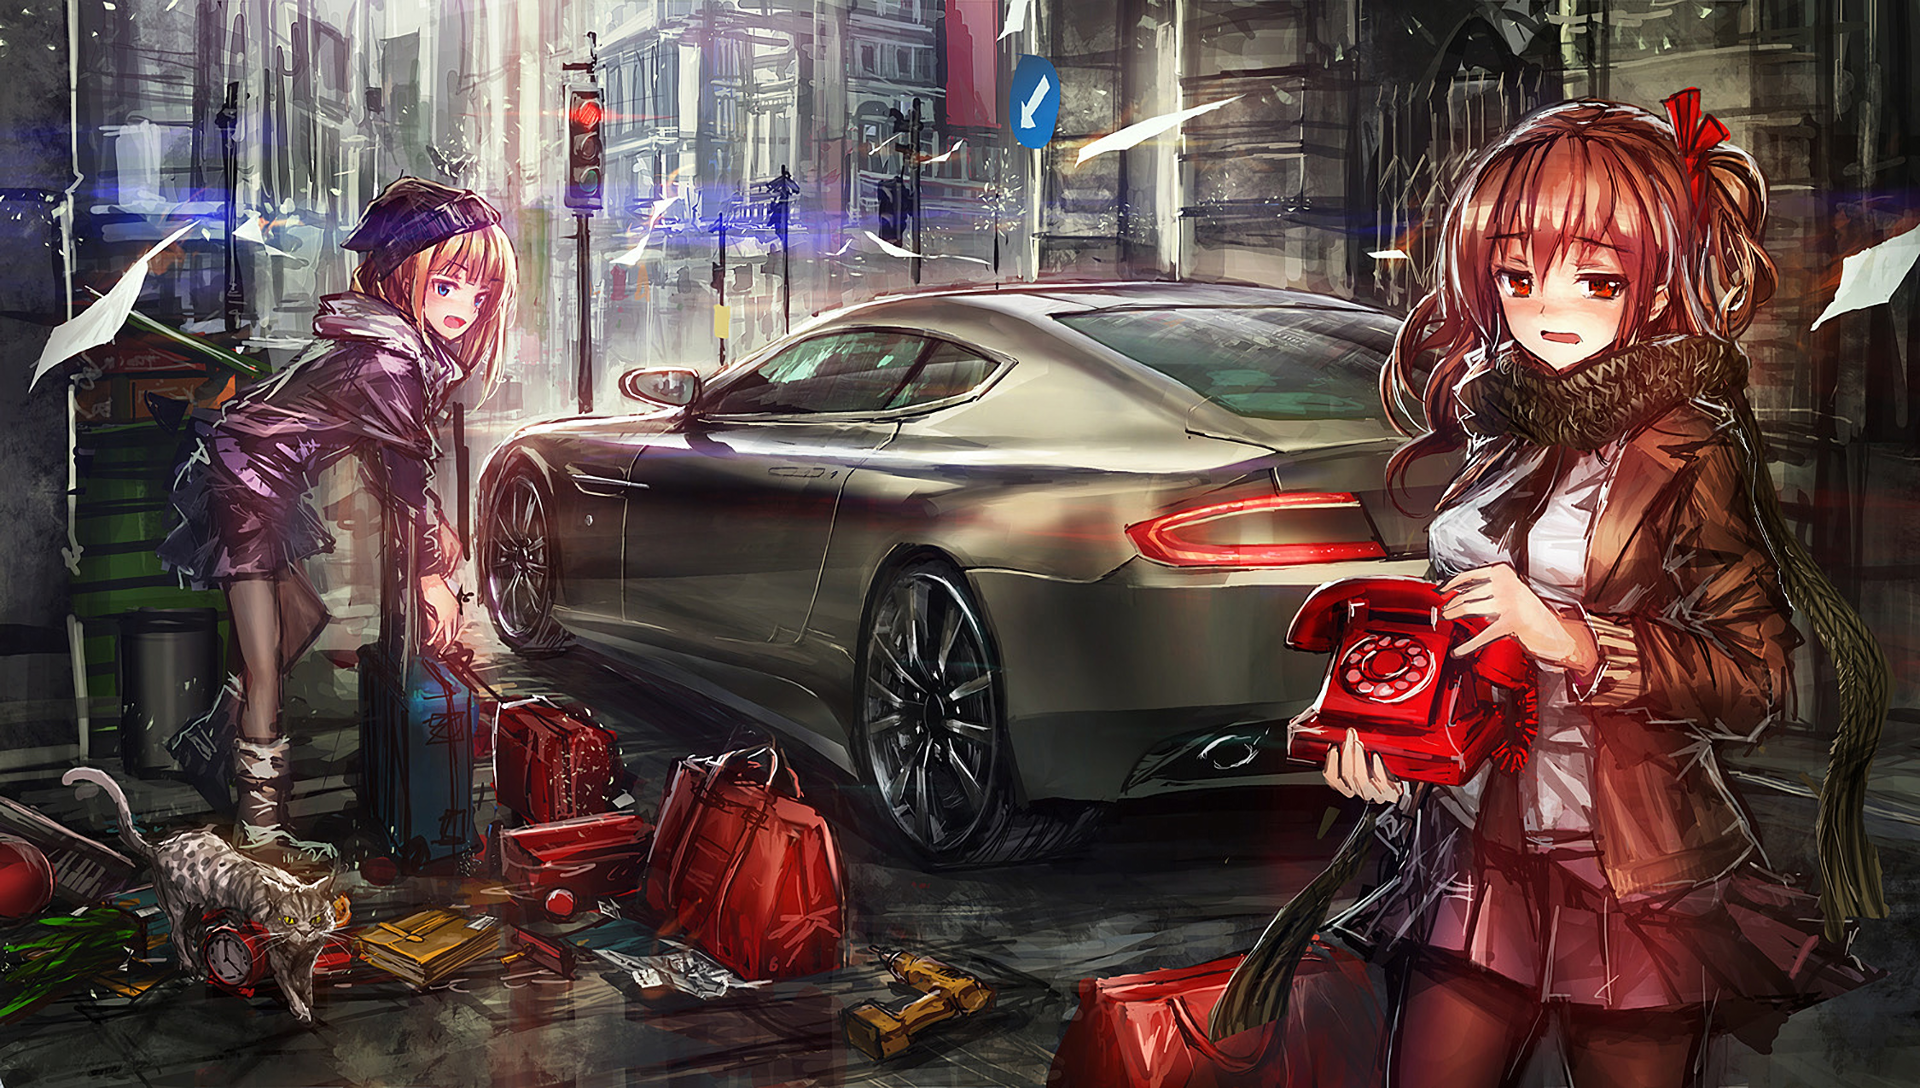 Anime 1920x1088 manga anime girls anime phone urban car vehicle red eyes city women outdoors cats _LM7_ two women women with cars original characters